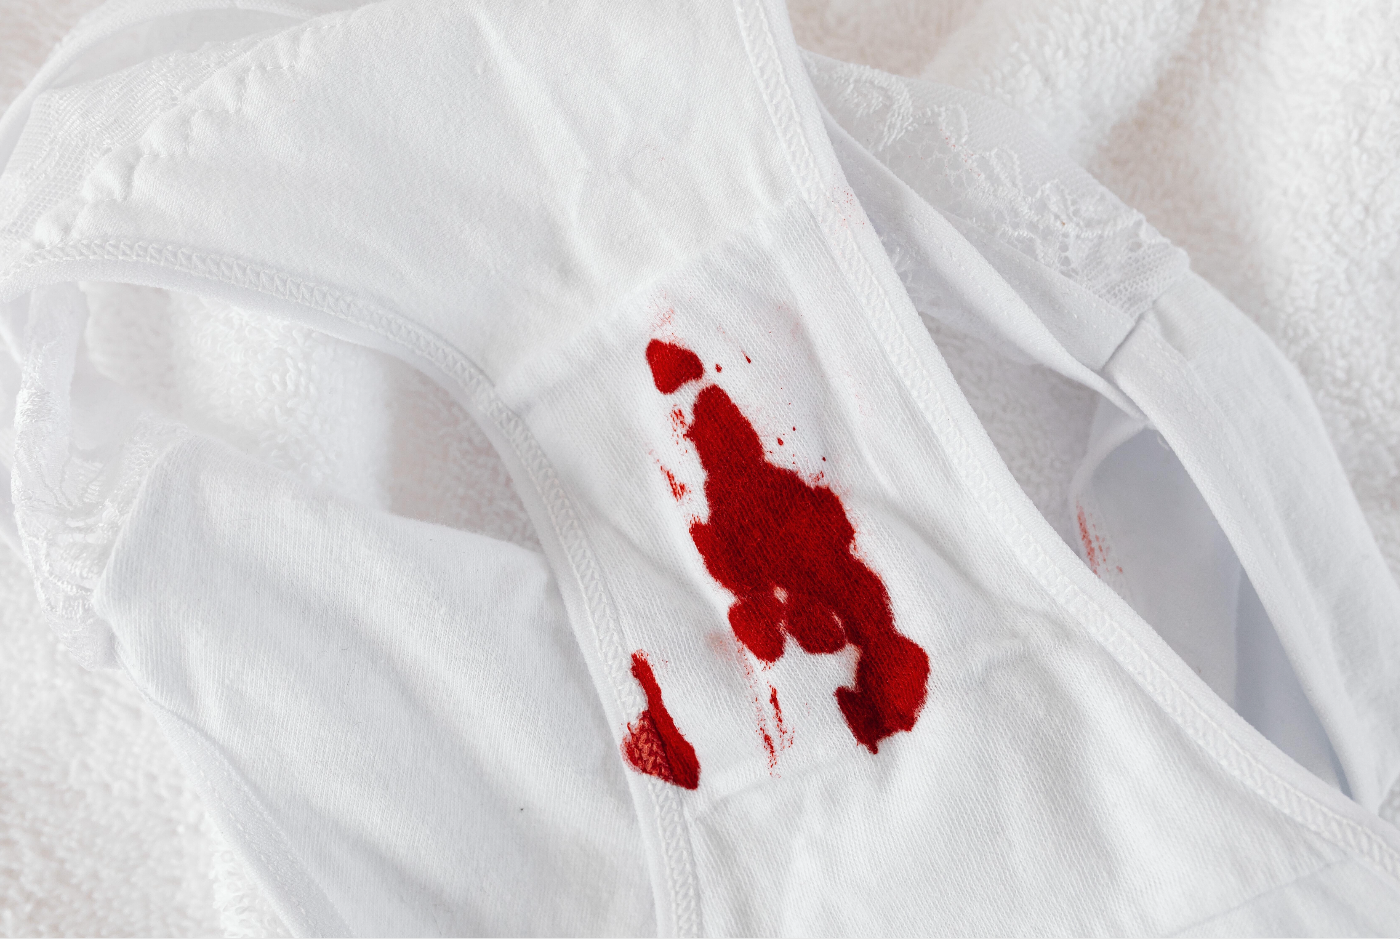 What are the blood clots in your period? Understanding the basics